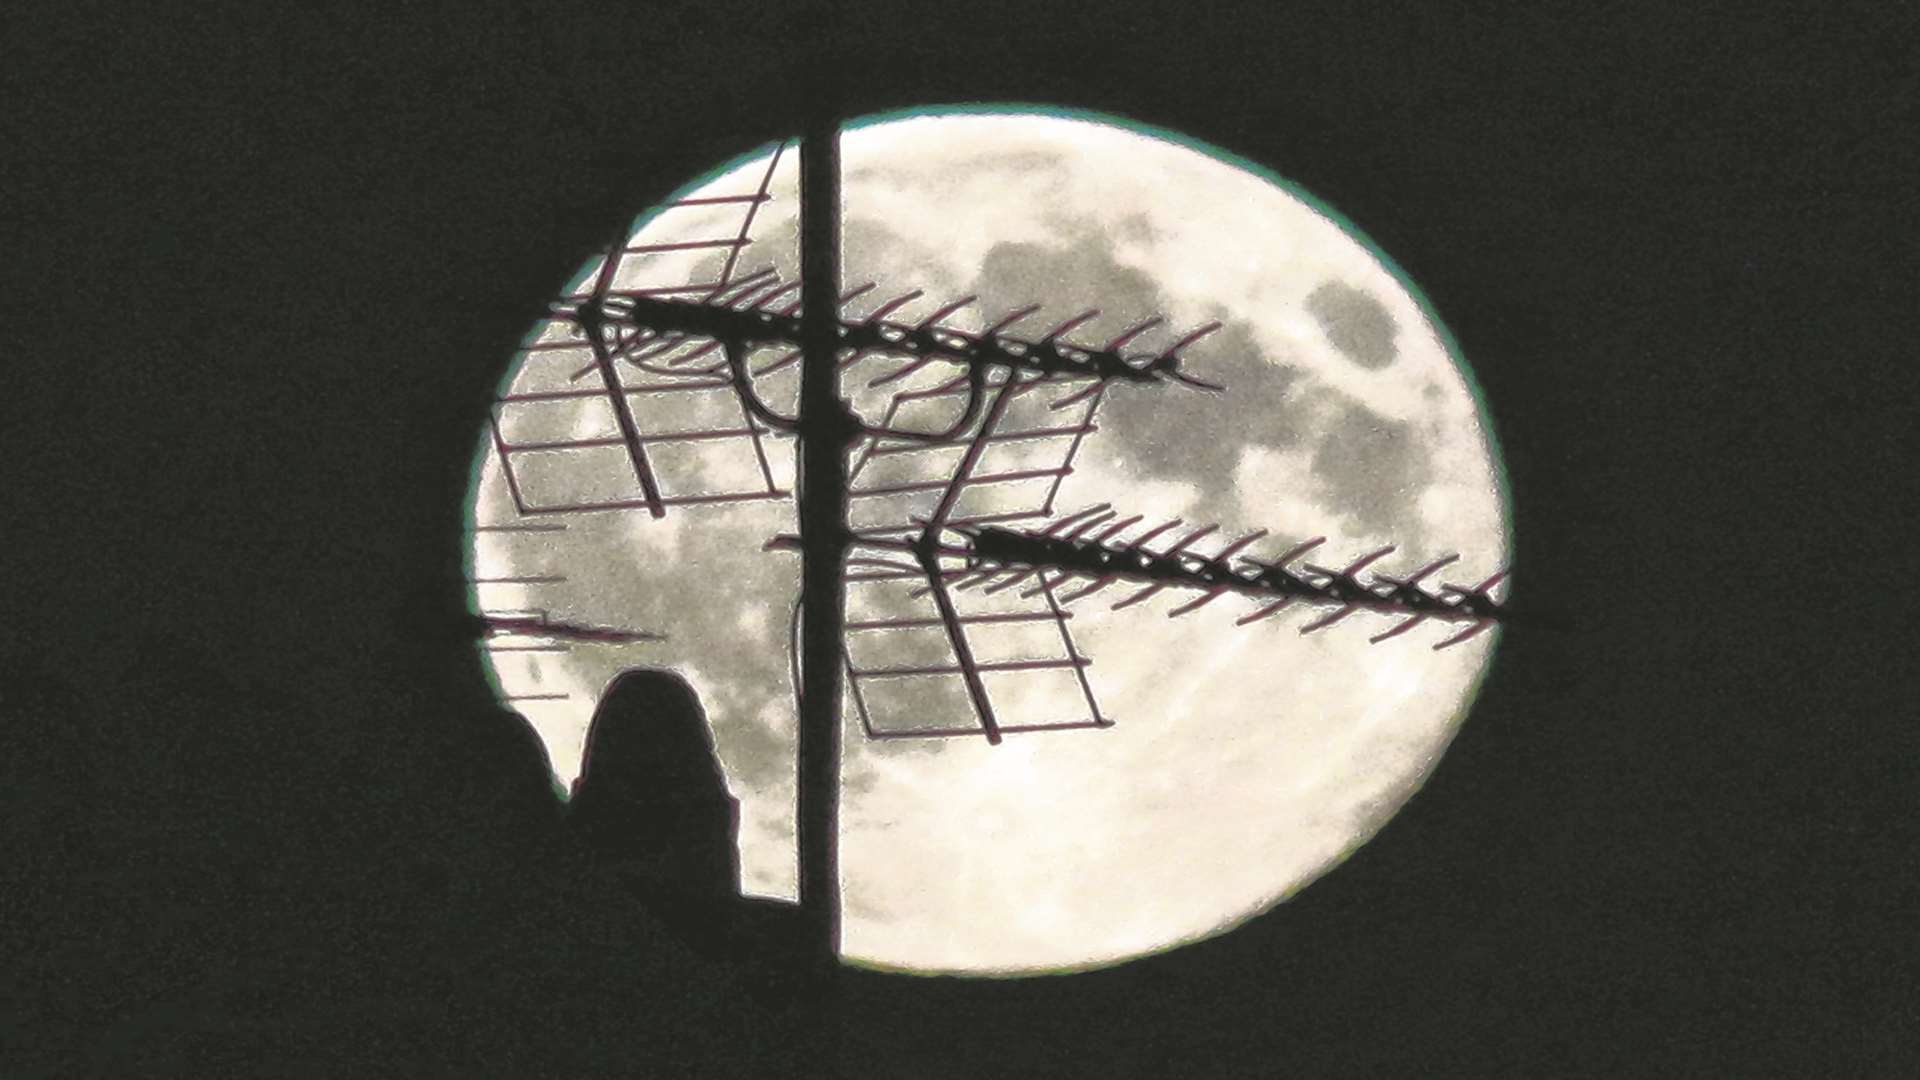 Eerie shot of a past supermoon captured by Kerry Riley of Herne Bay